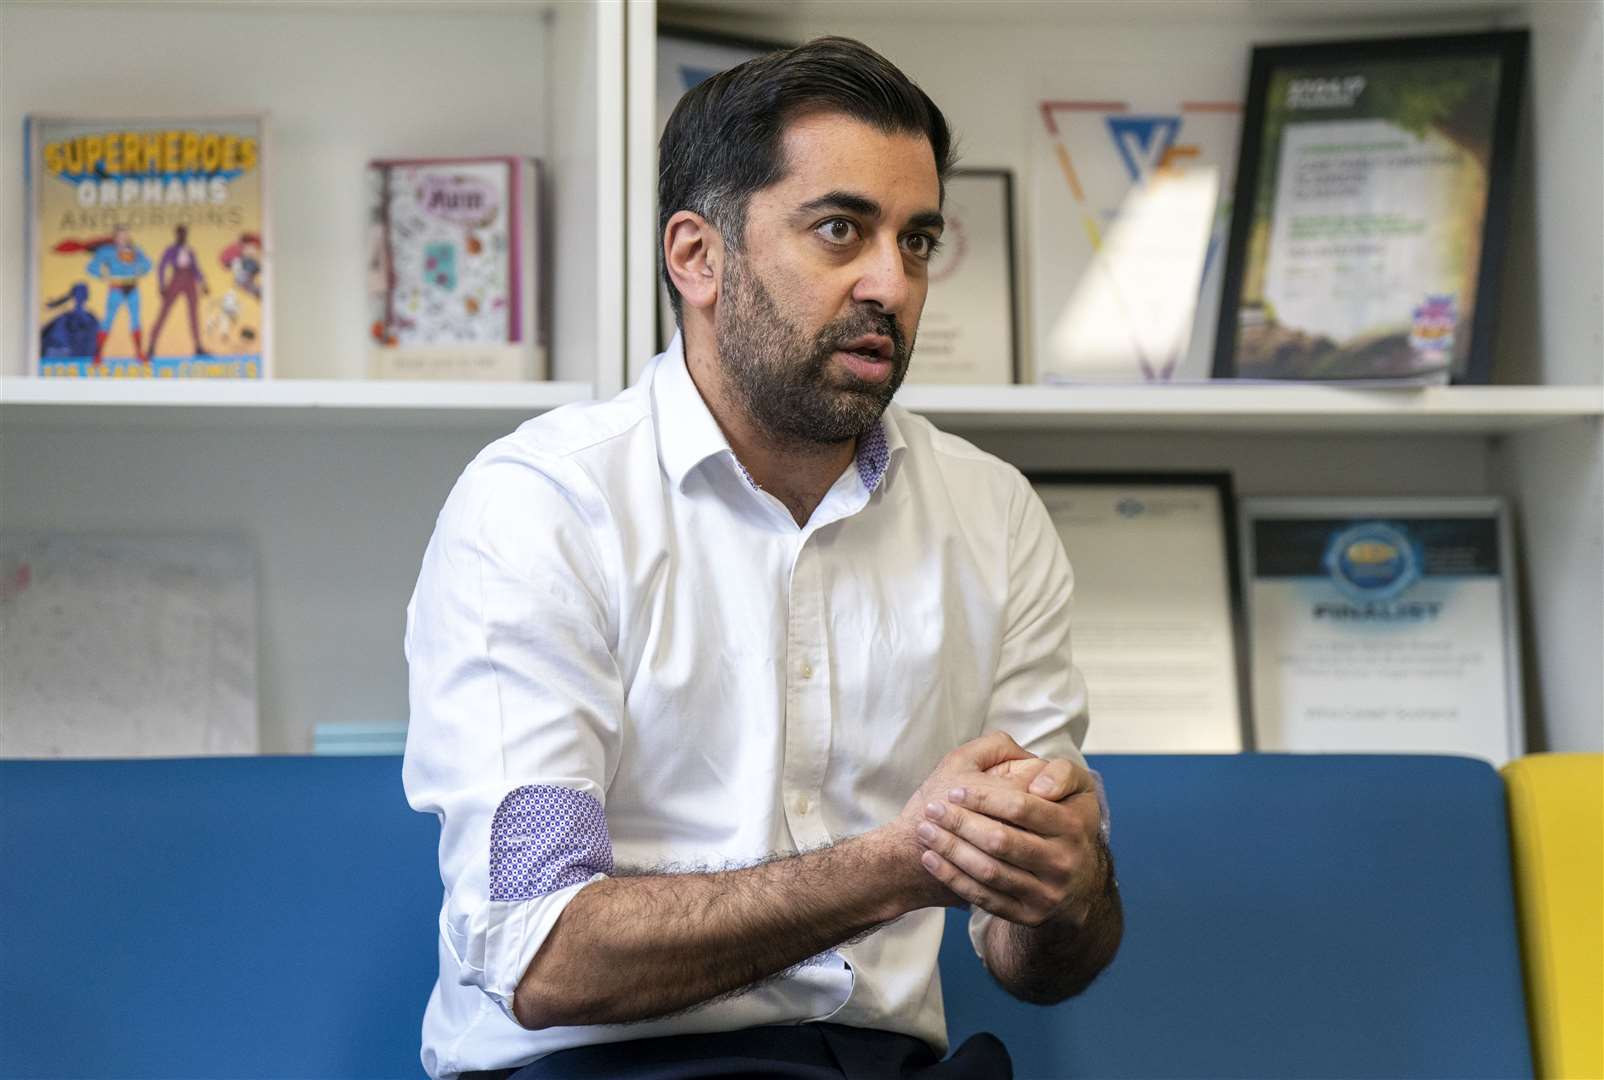 Junior doctors said Health Secretary Humza Yousaf has ‘failed to even commit to start meaningful negotiations’ on pay (Jane Barlow/PA)